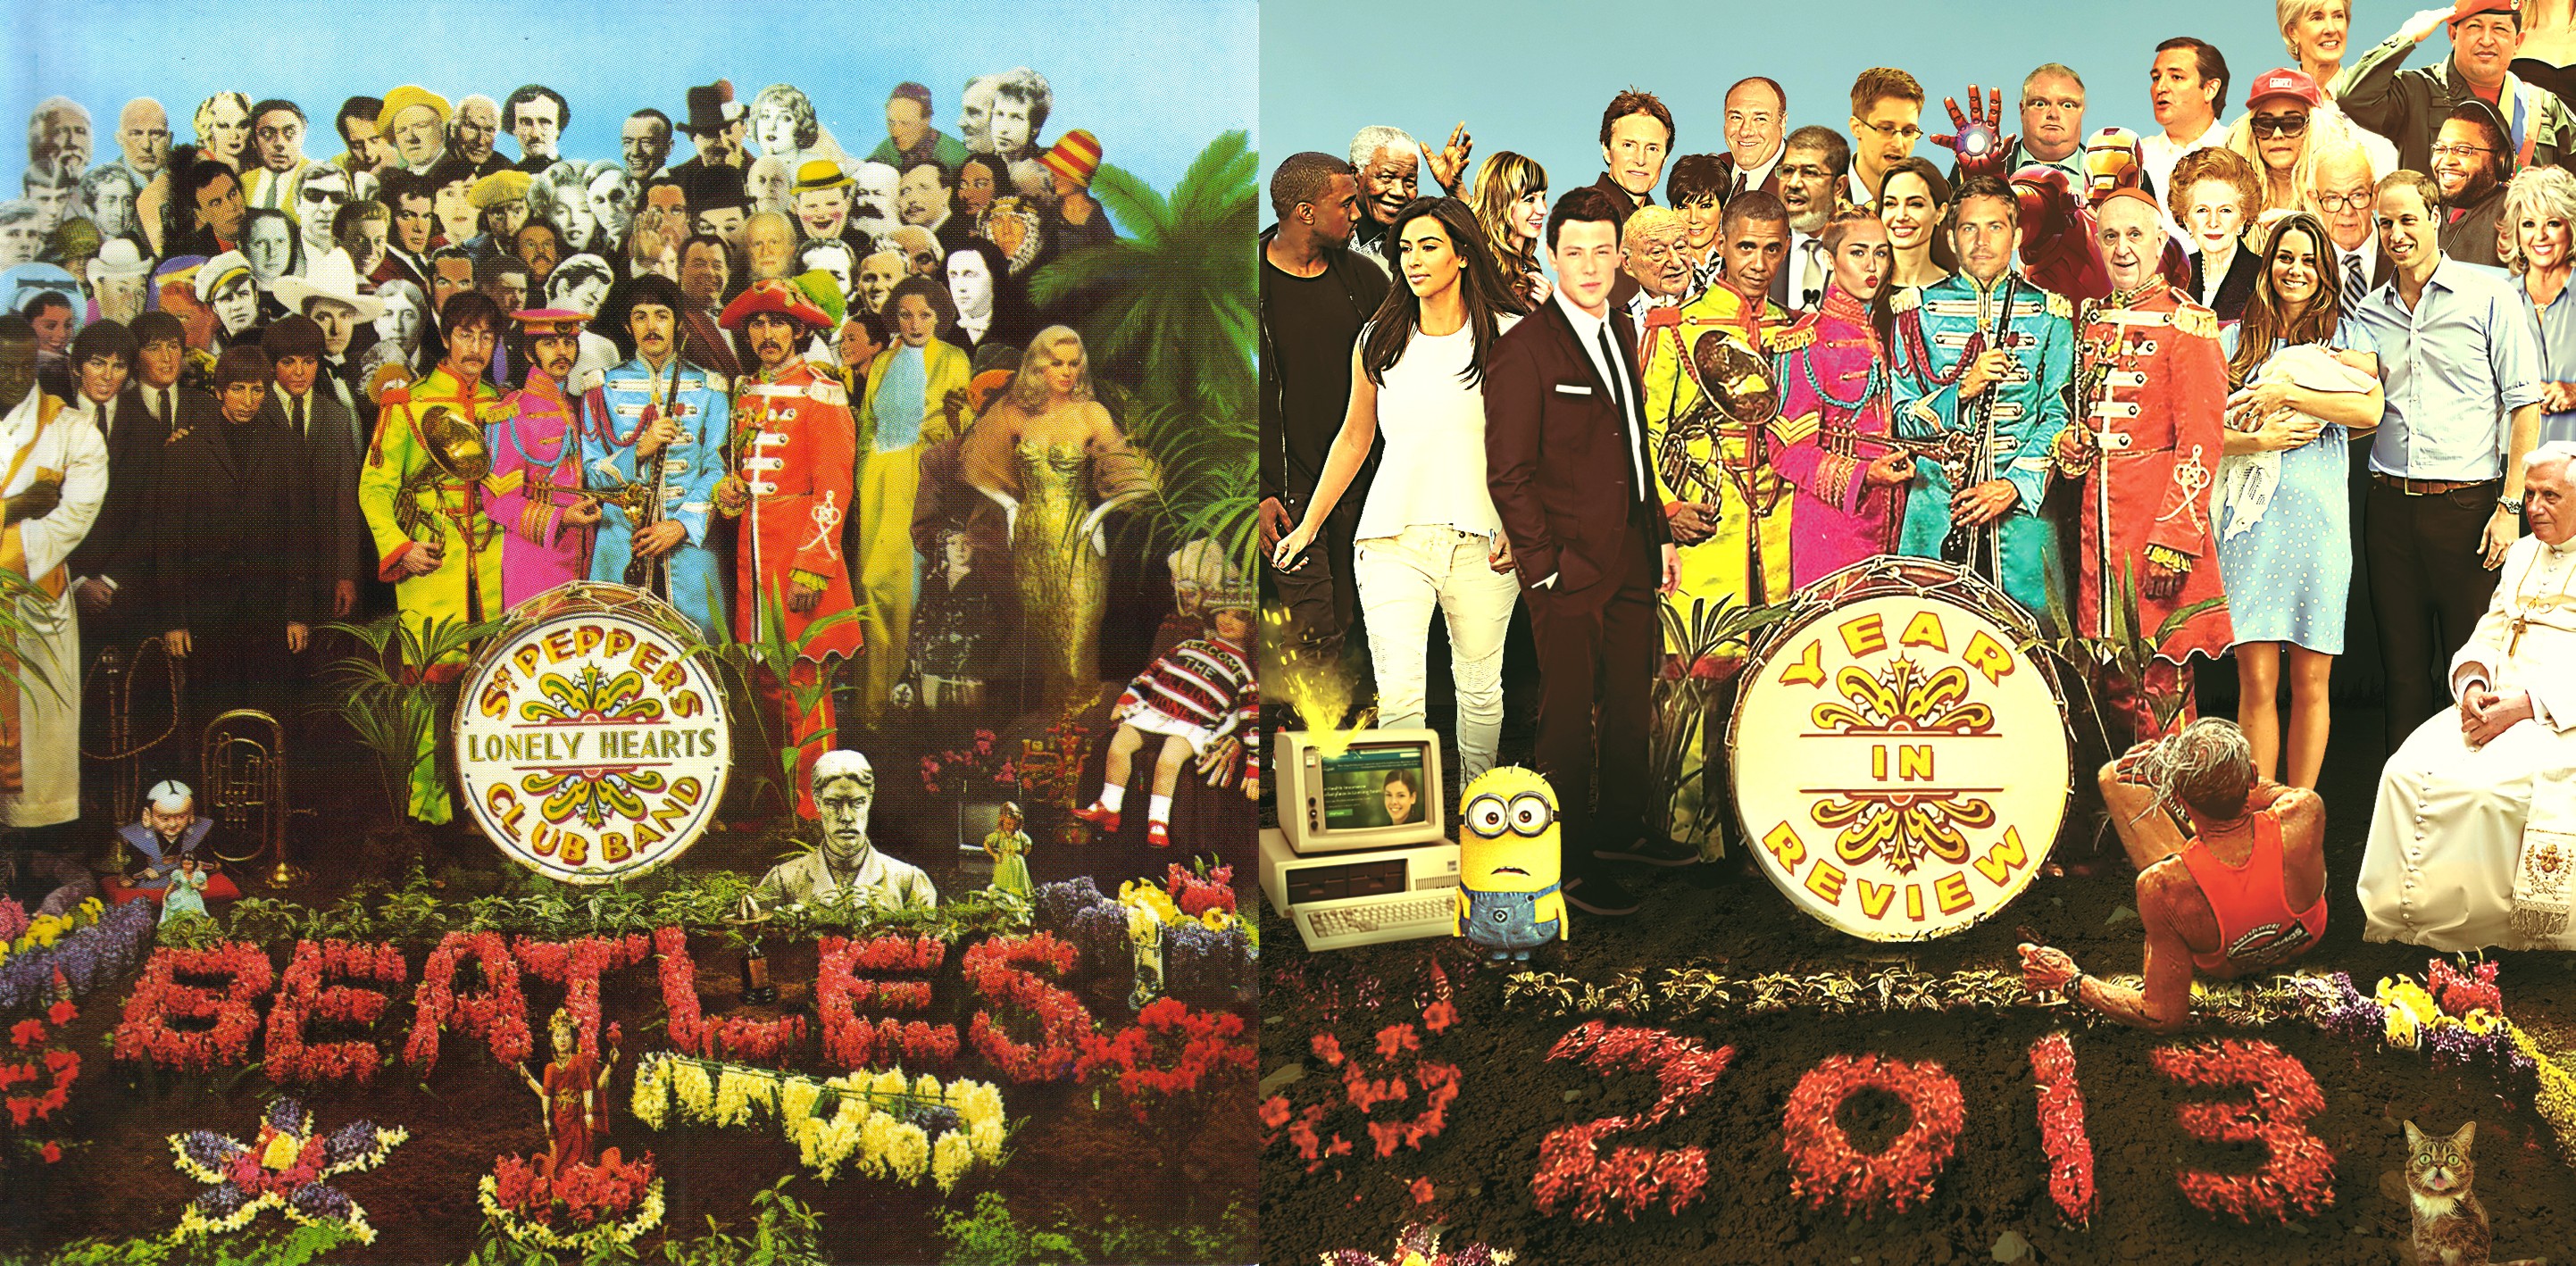 Beatles sgt pepper lonely. The Beatles сержант Пеппер. Sgt Pepper's Lonely Hearts Club Band. The Beatles Sgt. Pepper's Lonely Hearts Club Band 1967. Sgt Pepper's Lonely Hearts Club Band обложка.